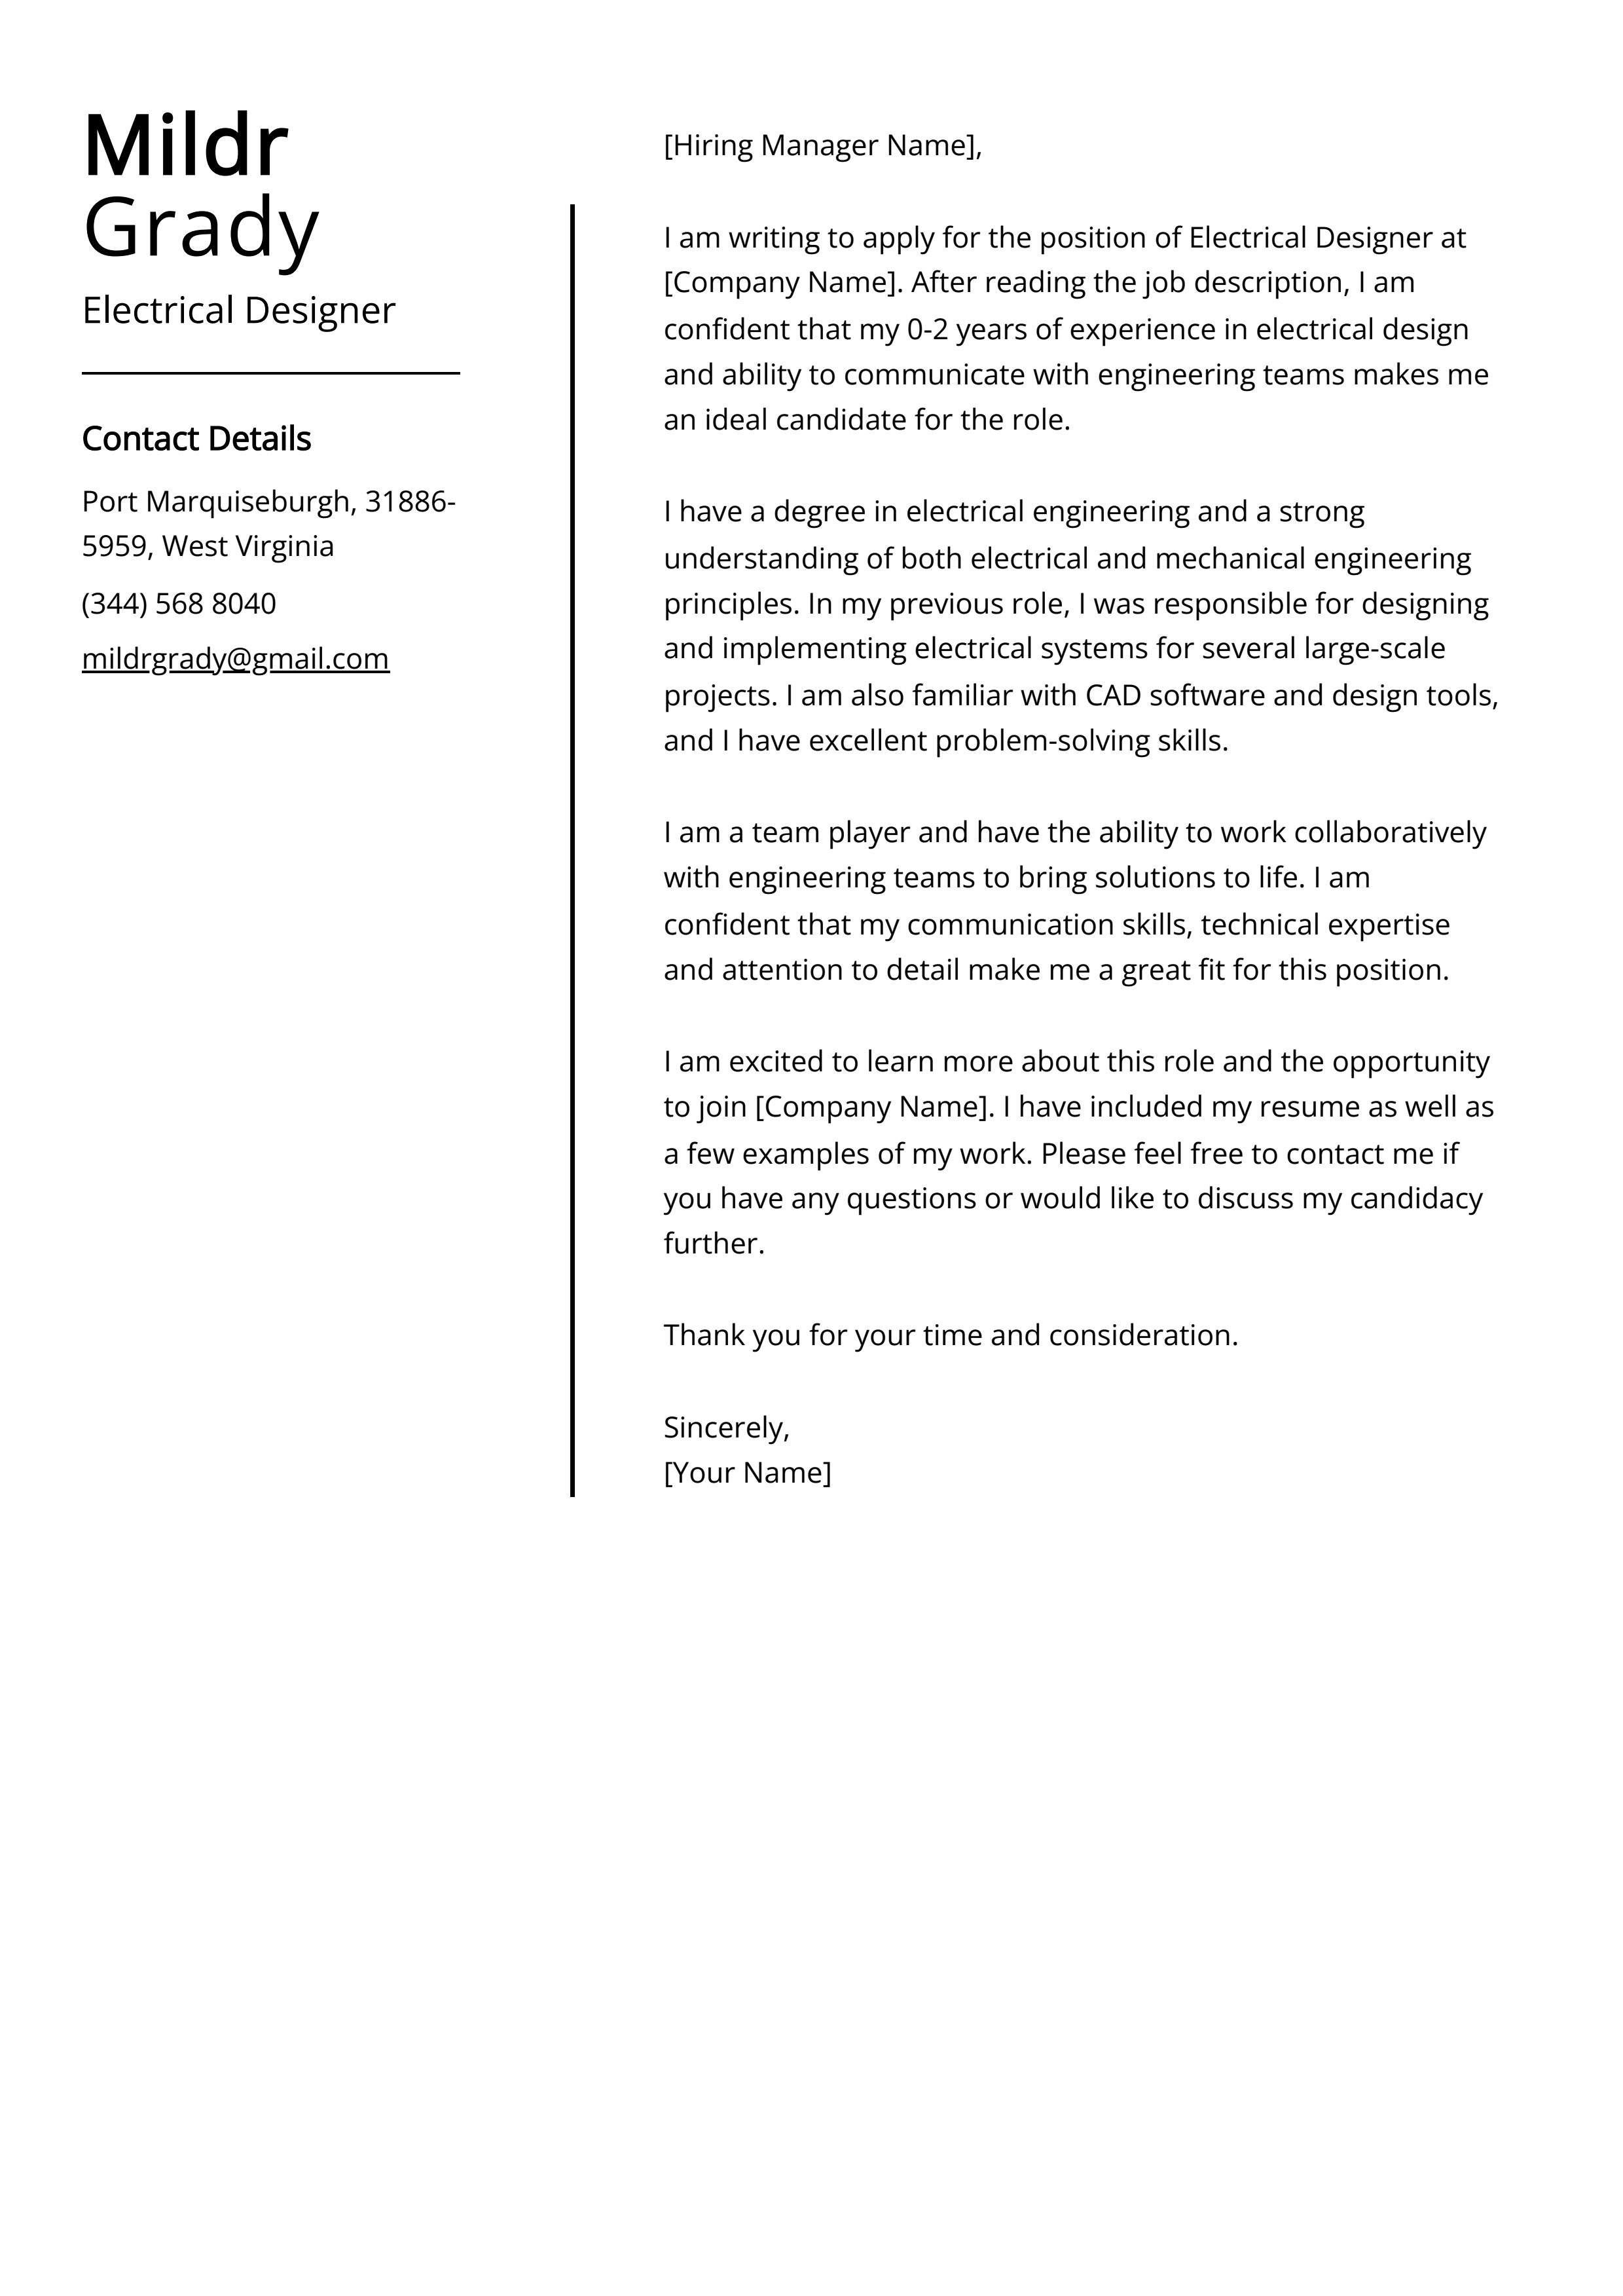 Electrical Designer Cover Letter Example